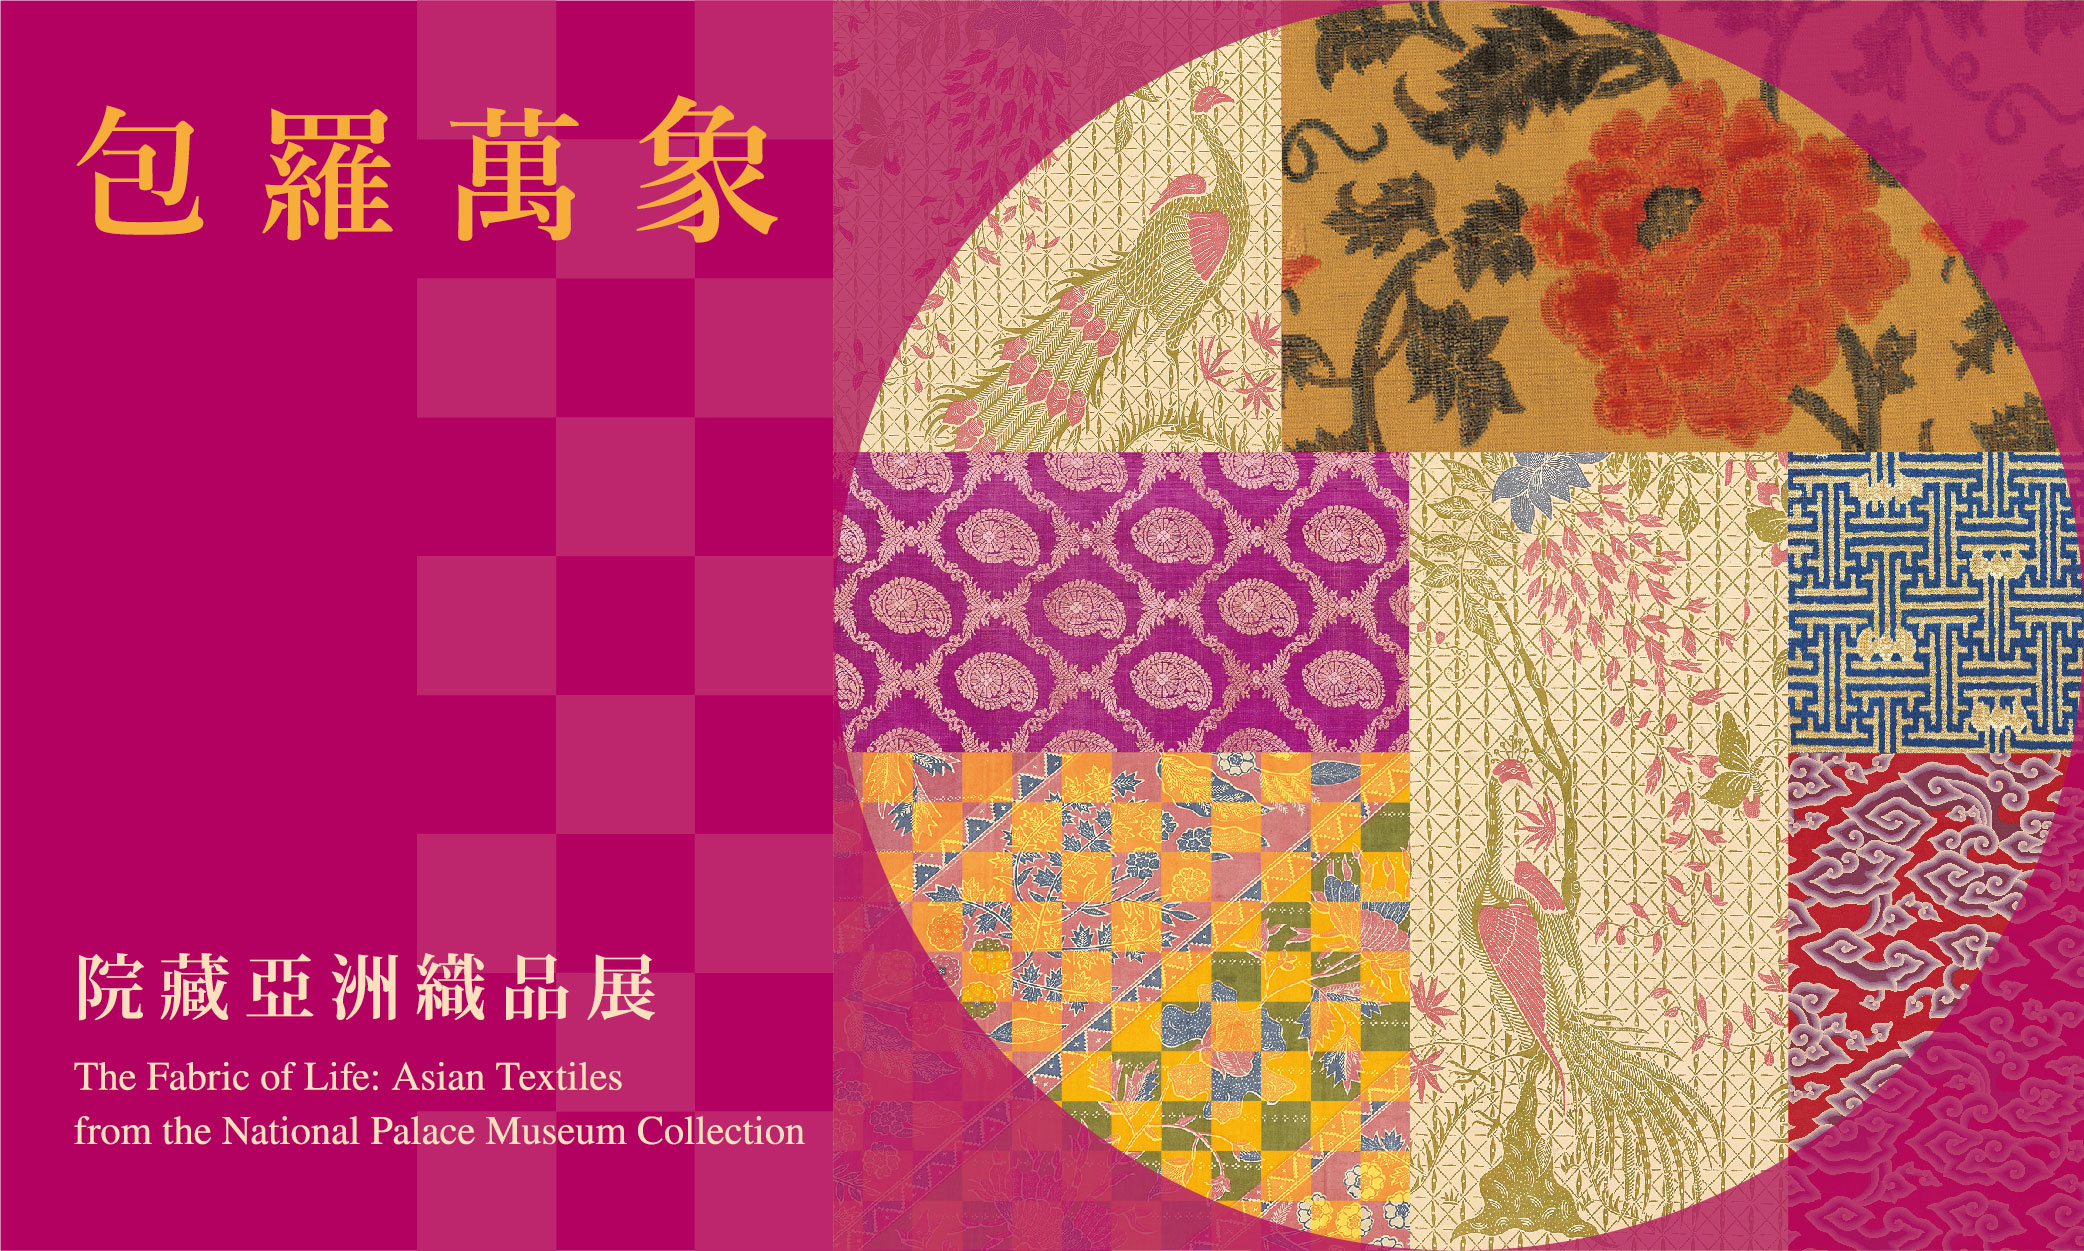 The Fabric of Life: Asian Textiles from the National Palace Museum Collection